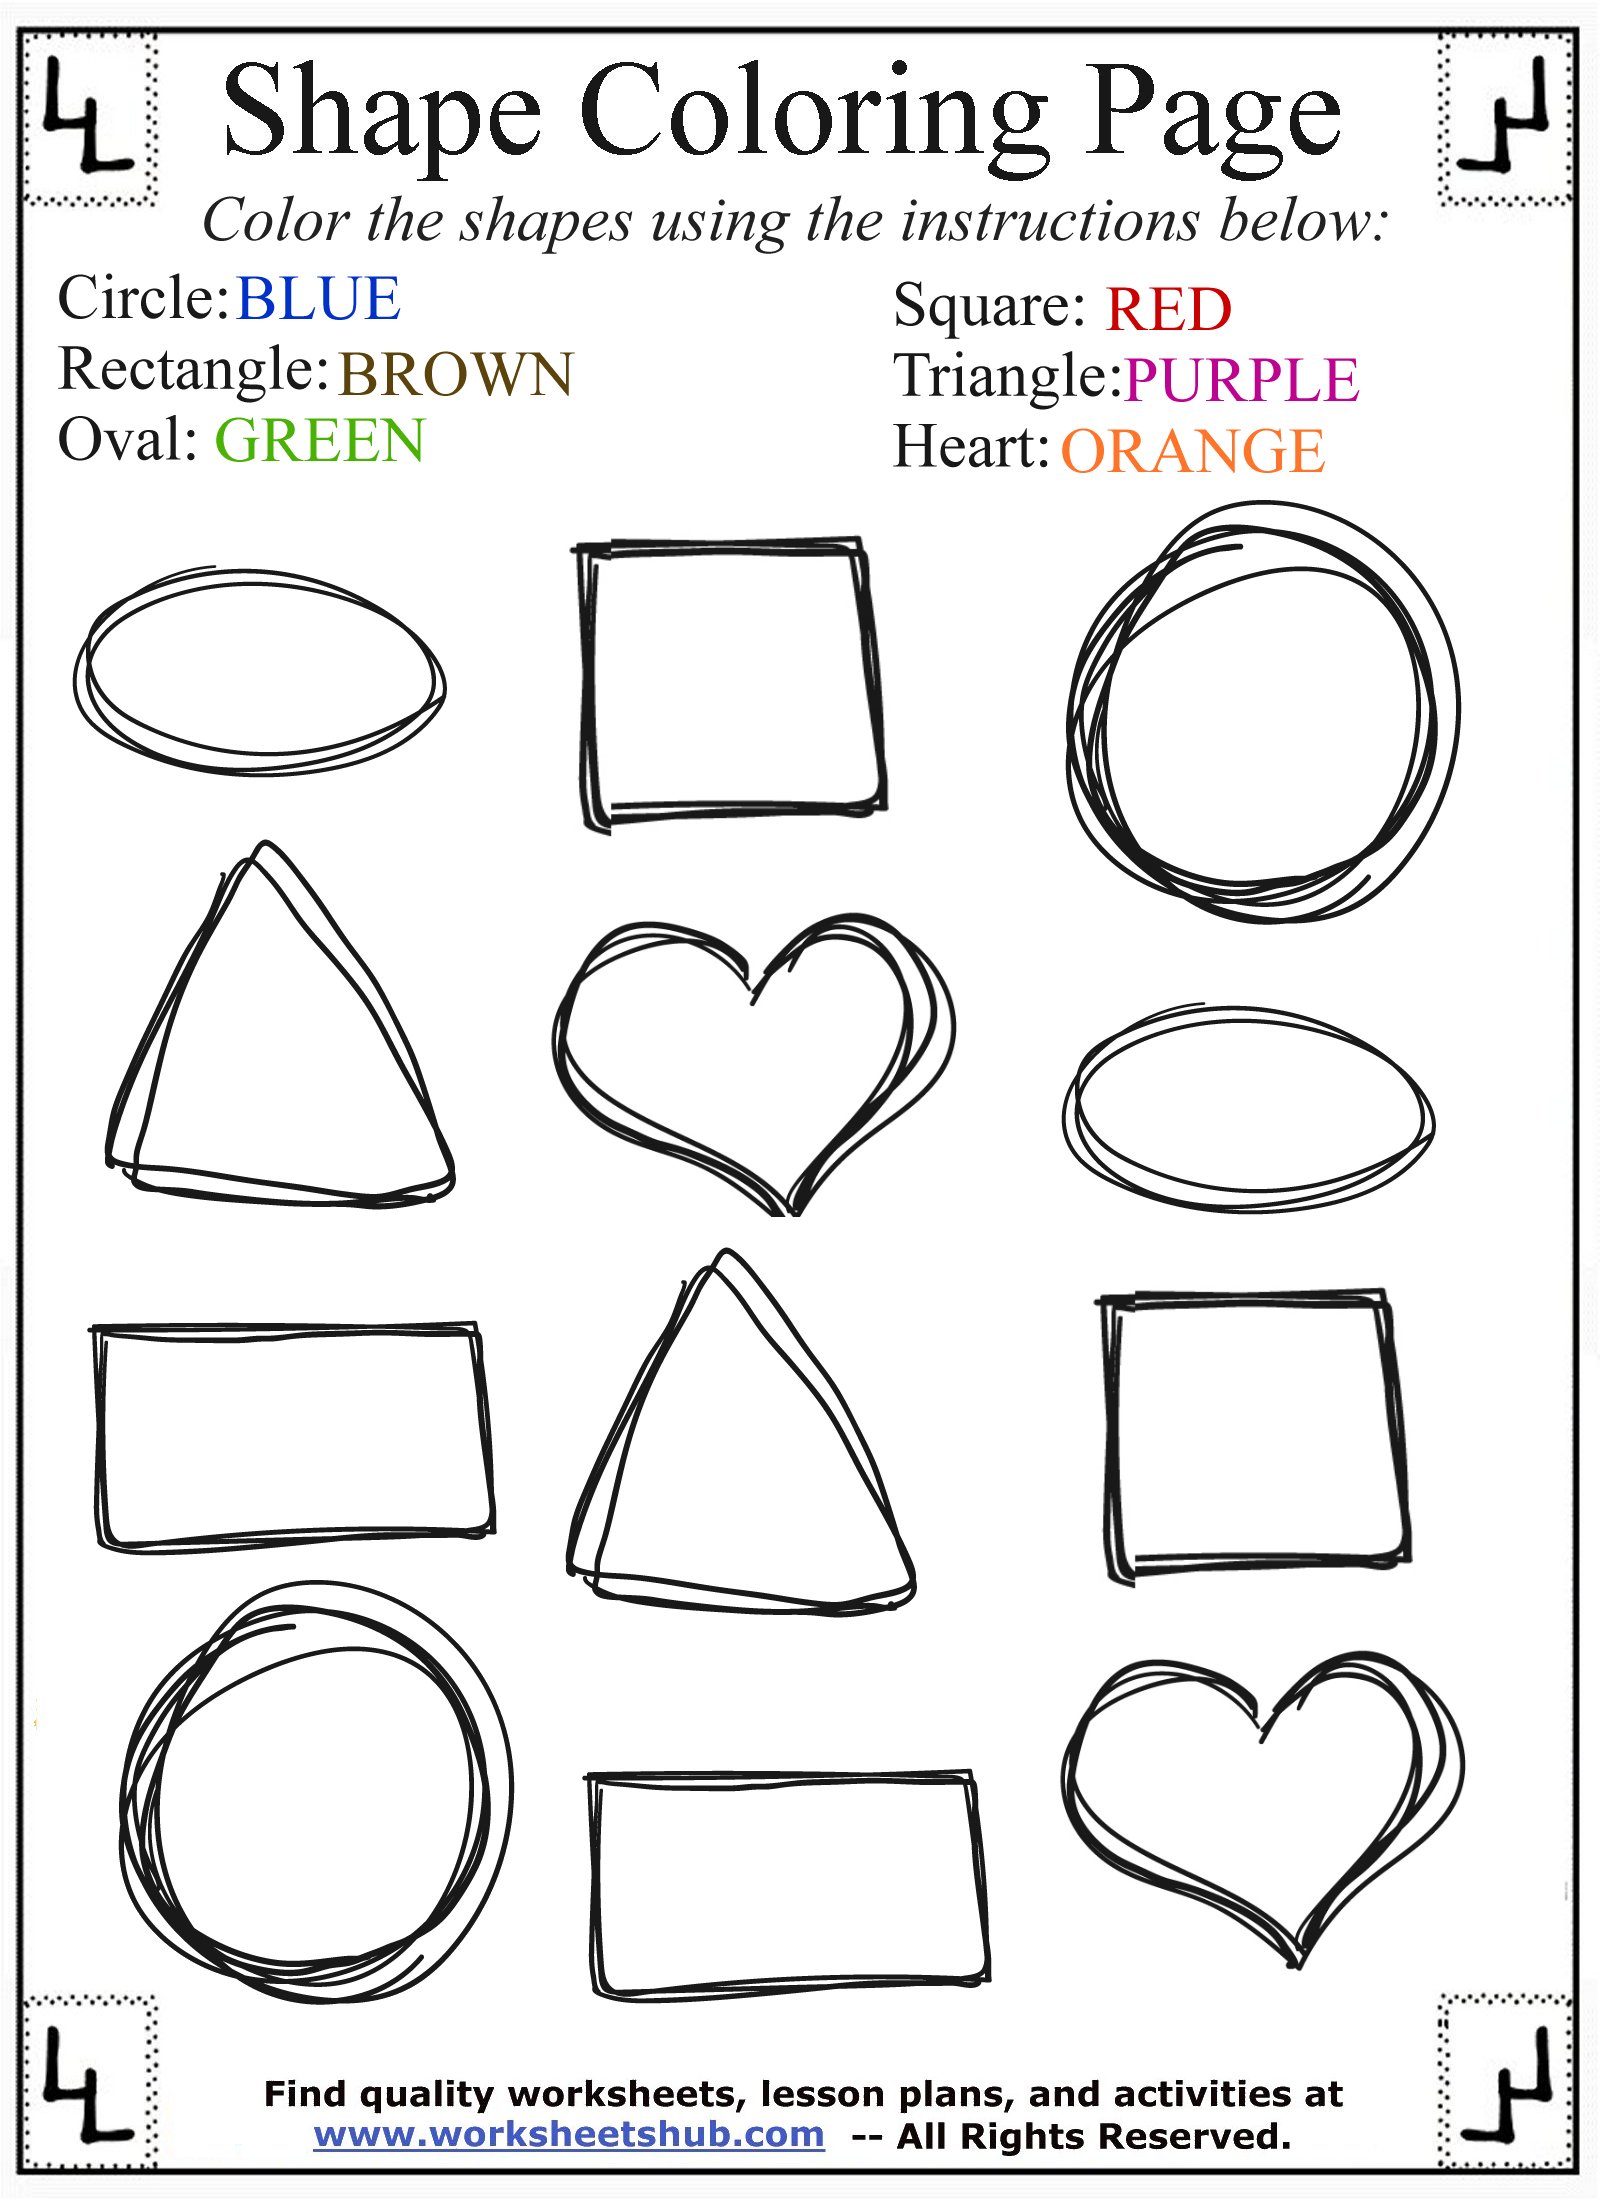 shape-coloring-pages